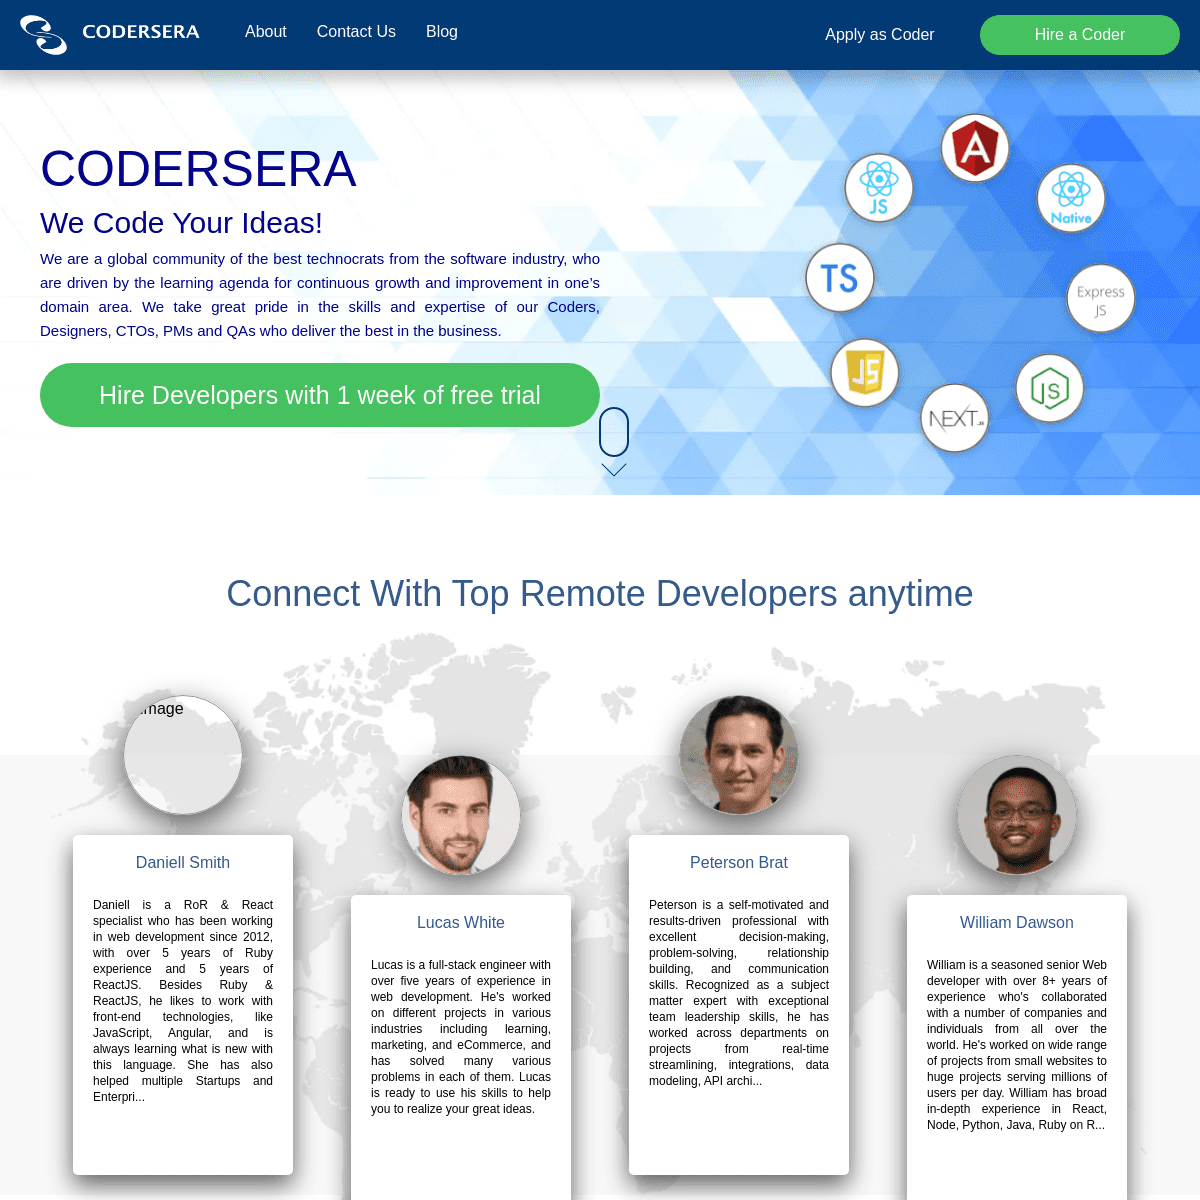 A complete backup of https://codersera.com